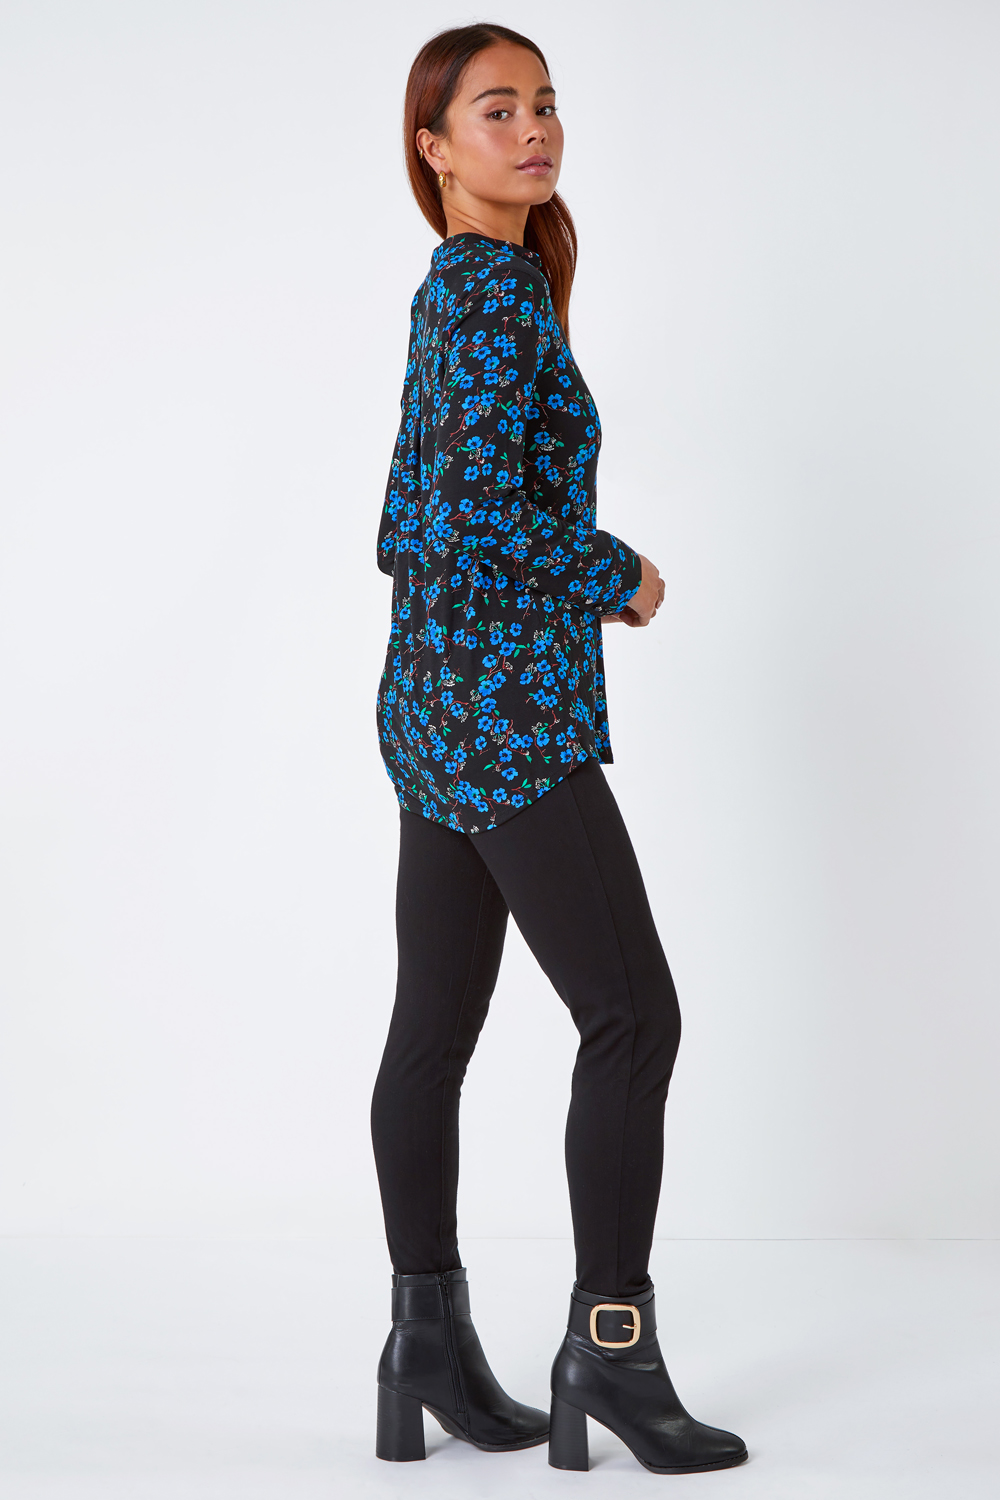 Blue Petite Floral Zip Detail Stretch Top, Image 3 of 5